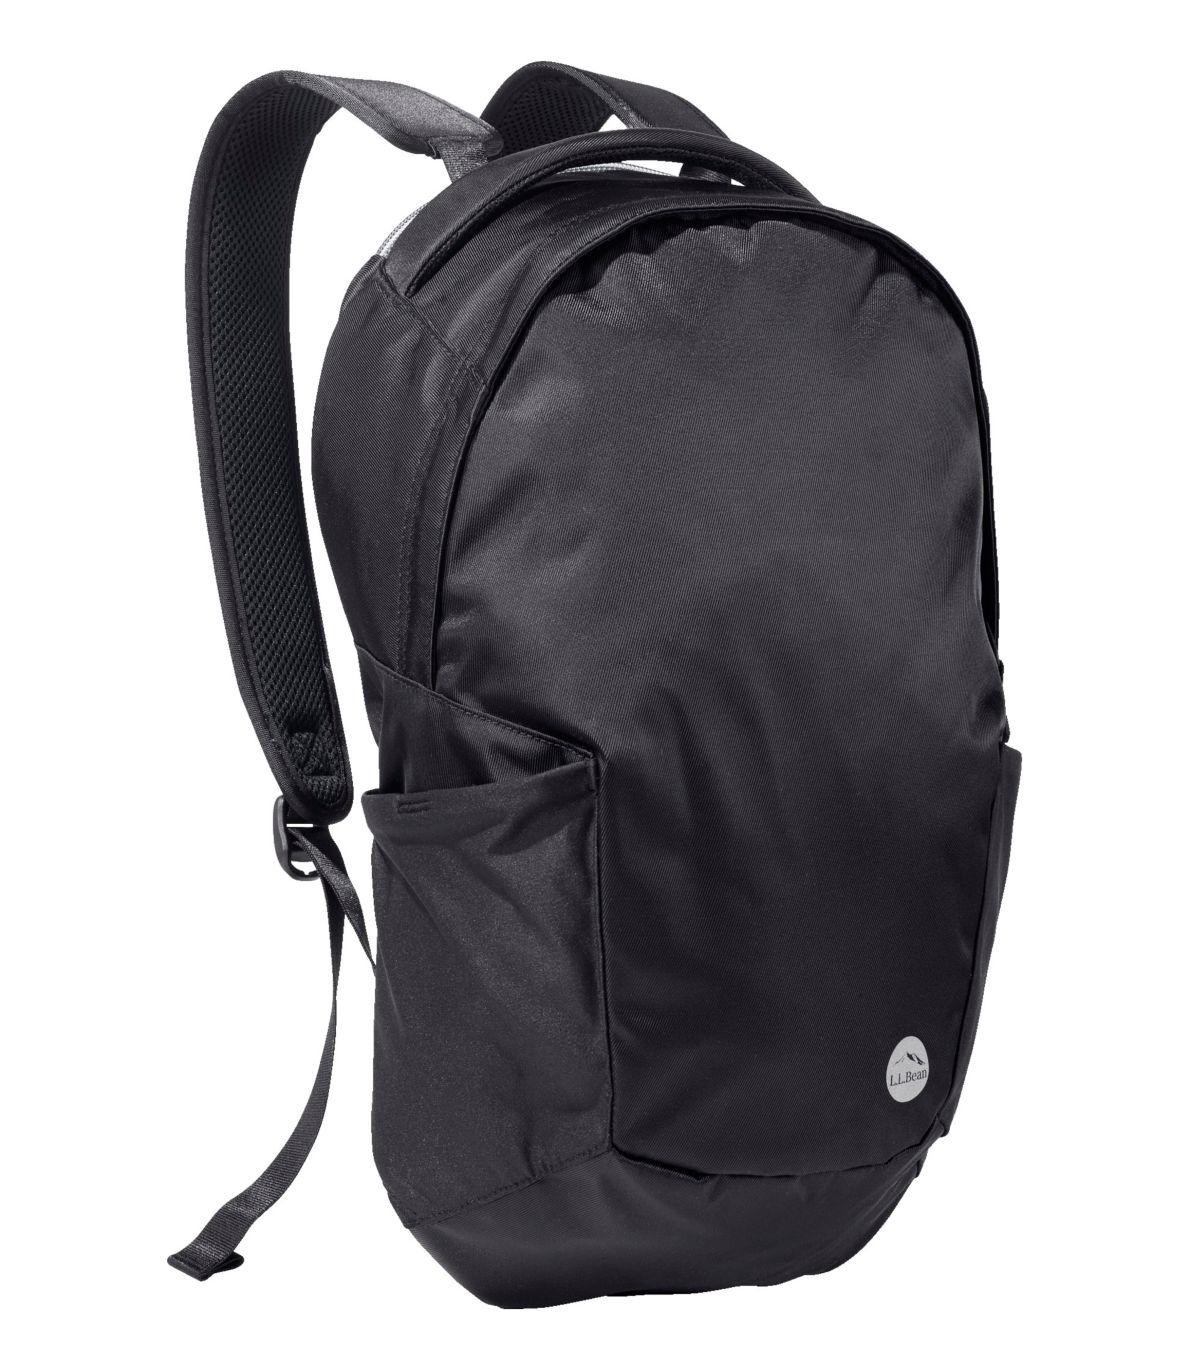 Boundless Backpack, 14L